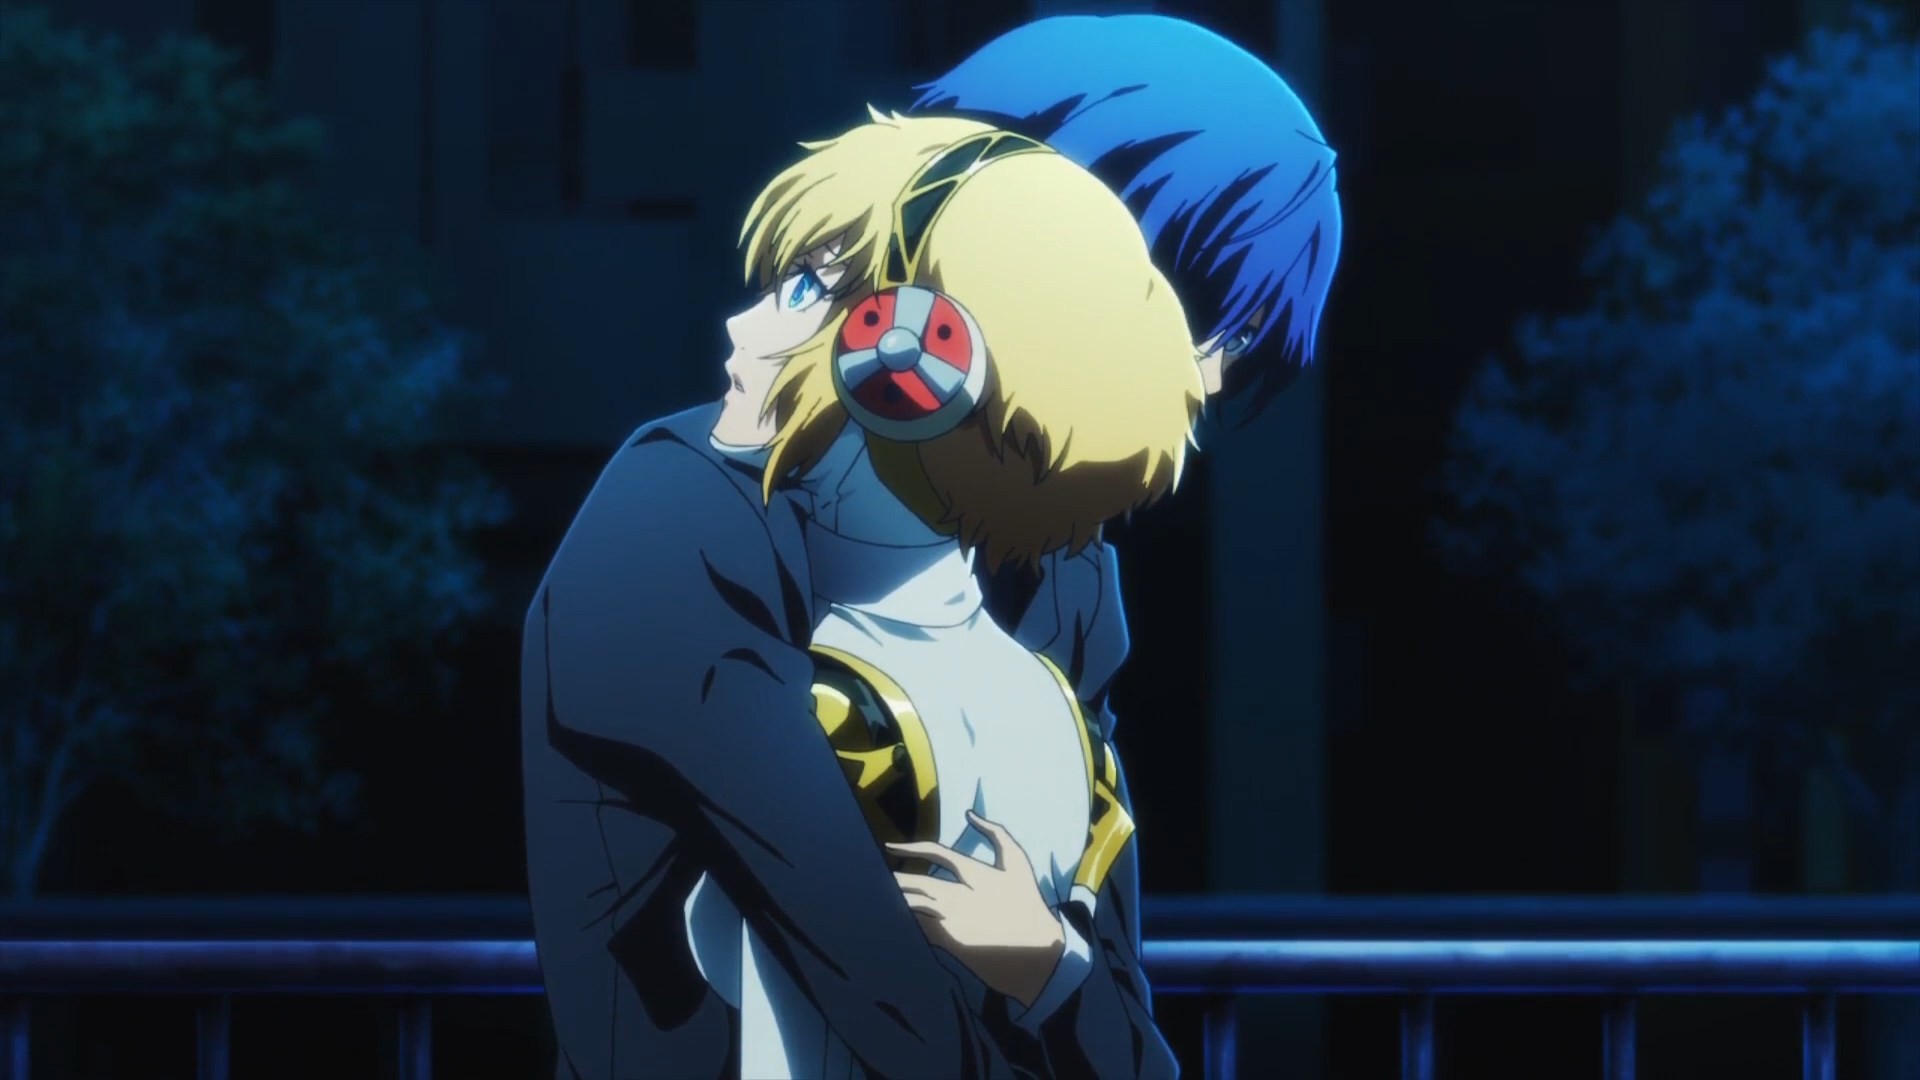 And nowhere is this more evident than in the way this movie handled Makoto, Aigis